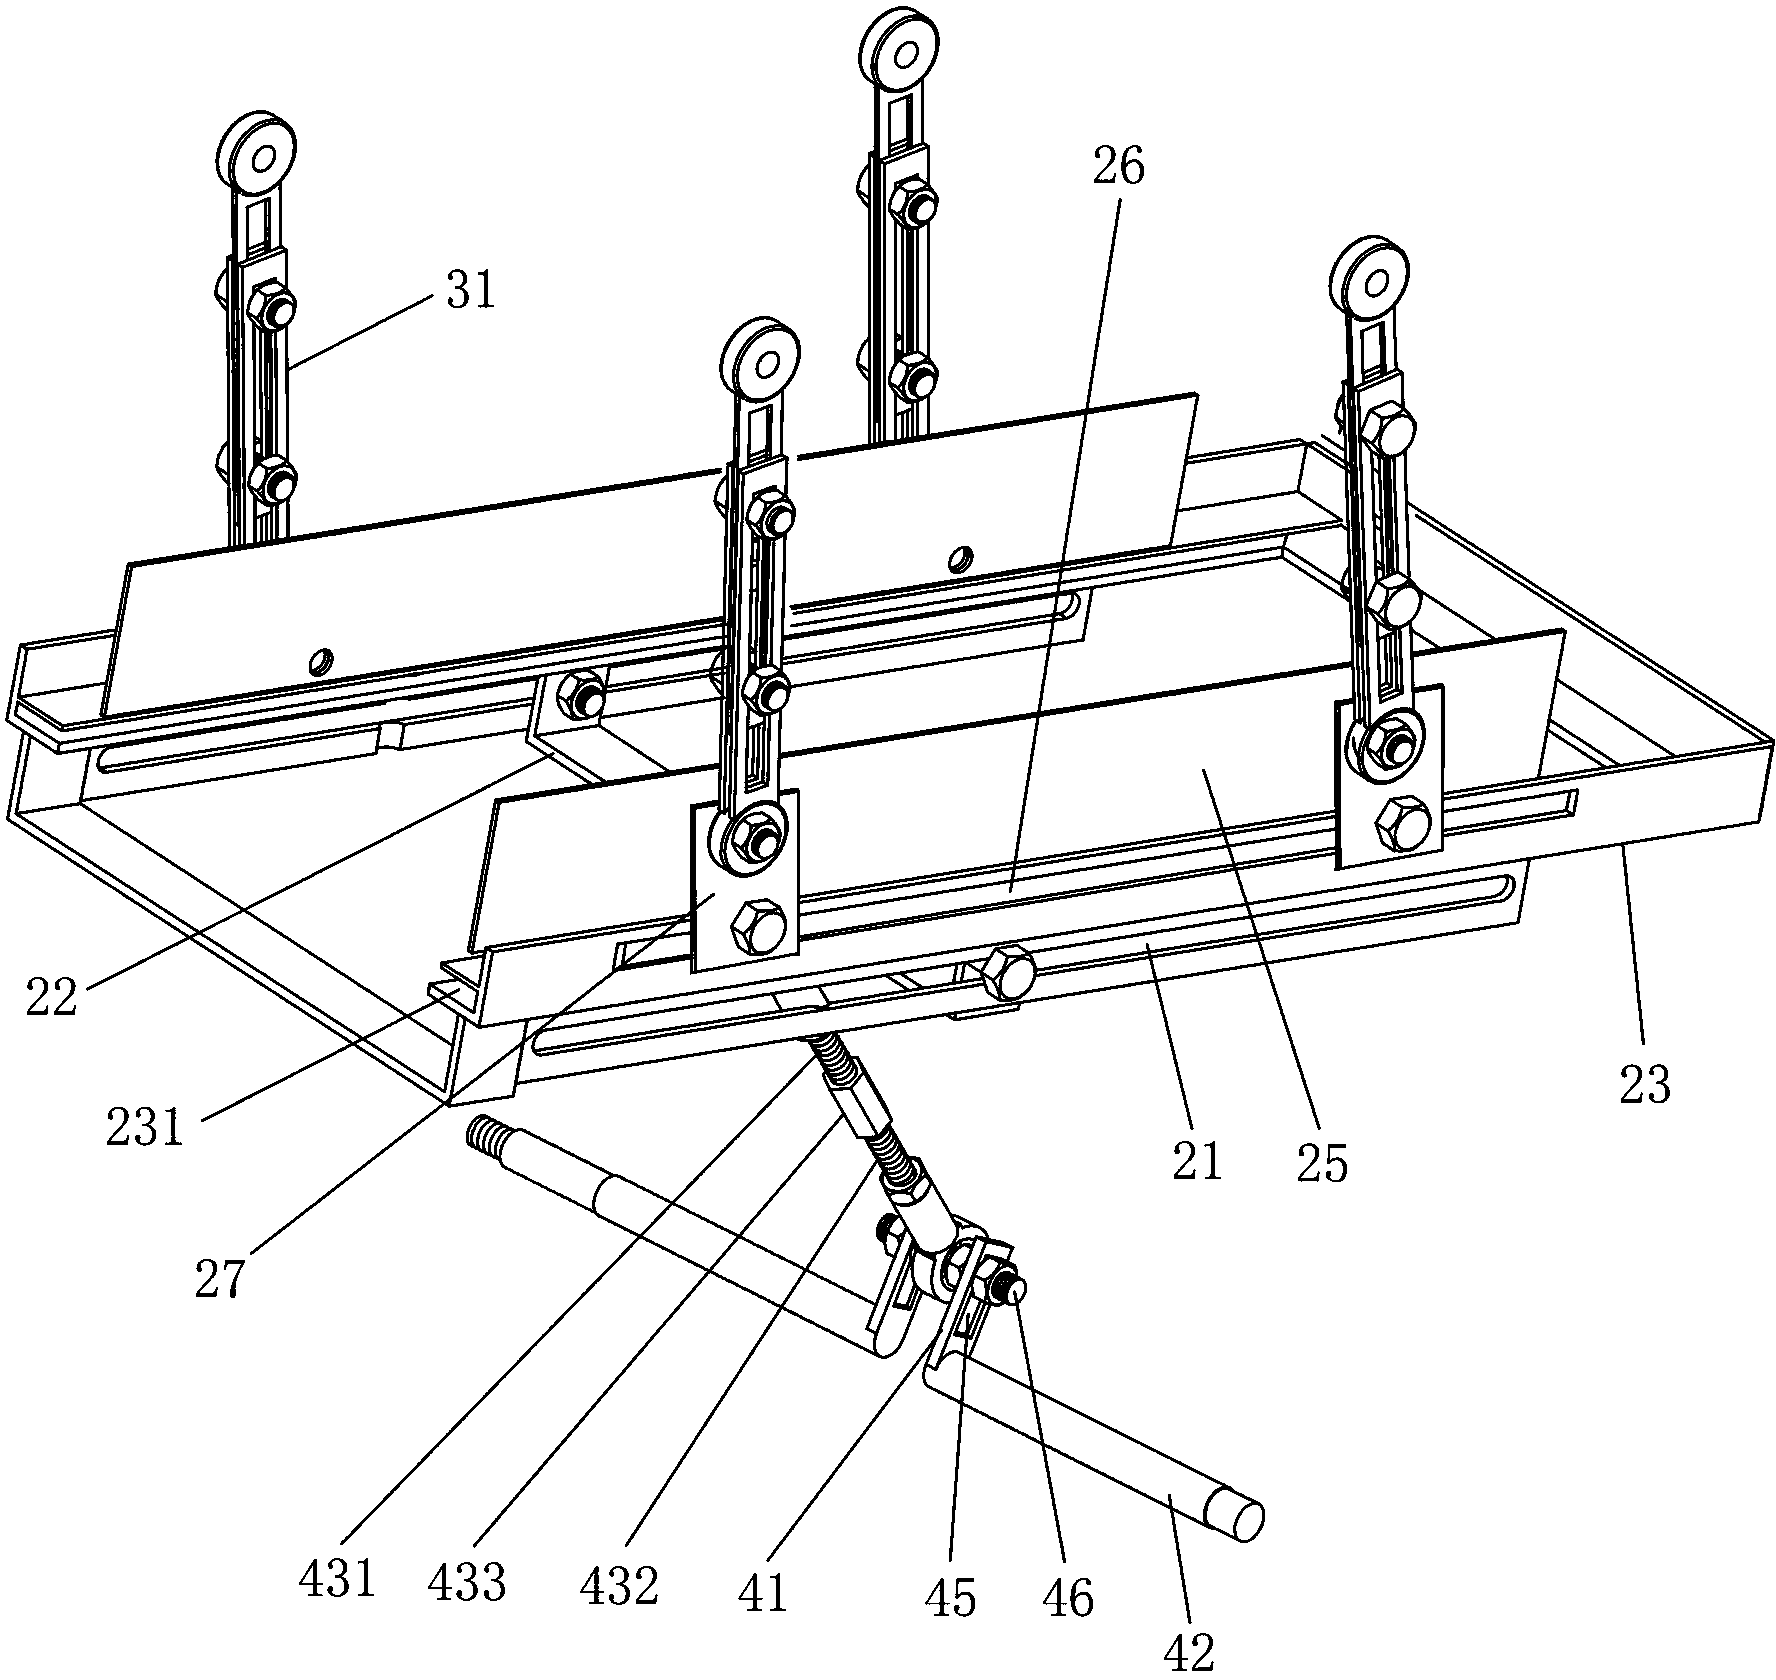 Vibrating straw walker separation test stand with adjustable parameters